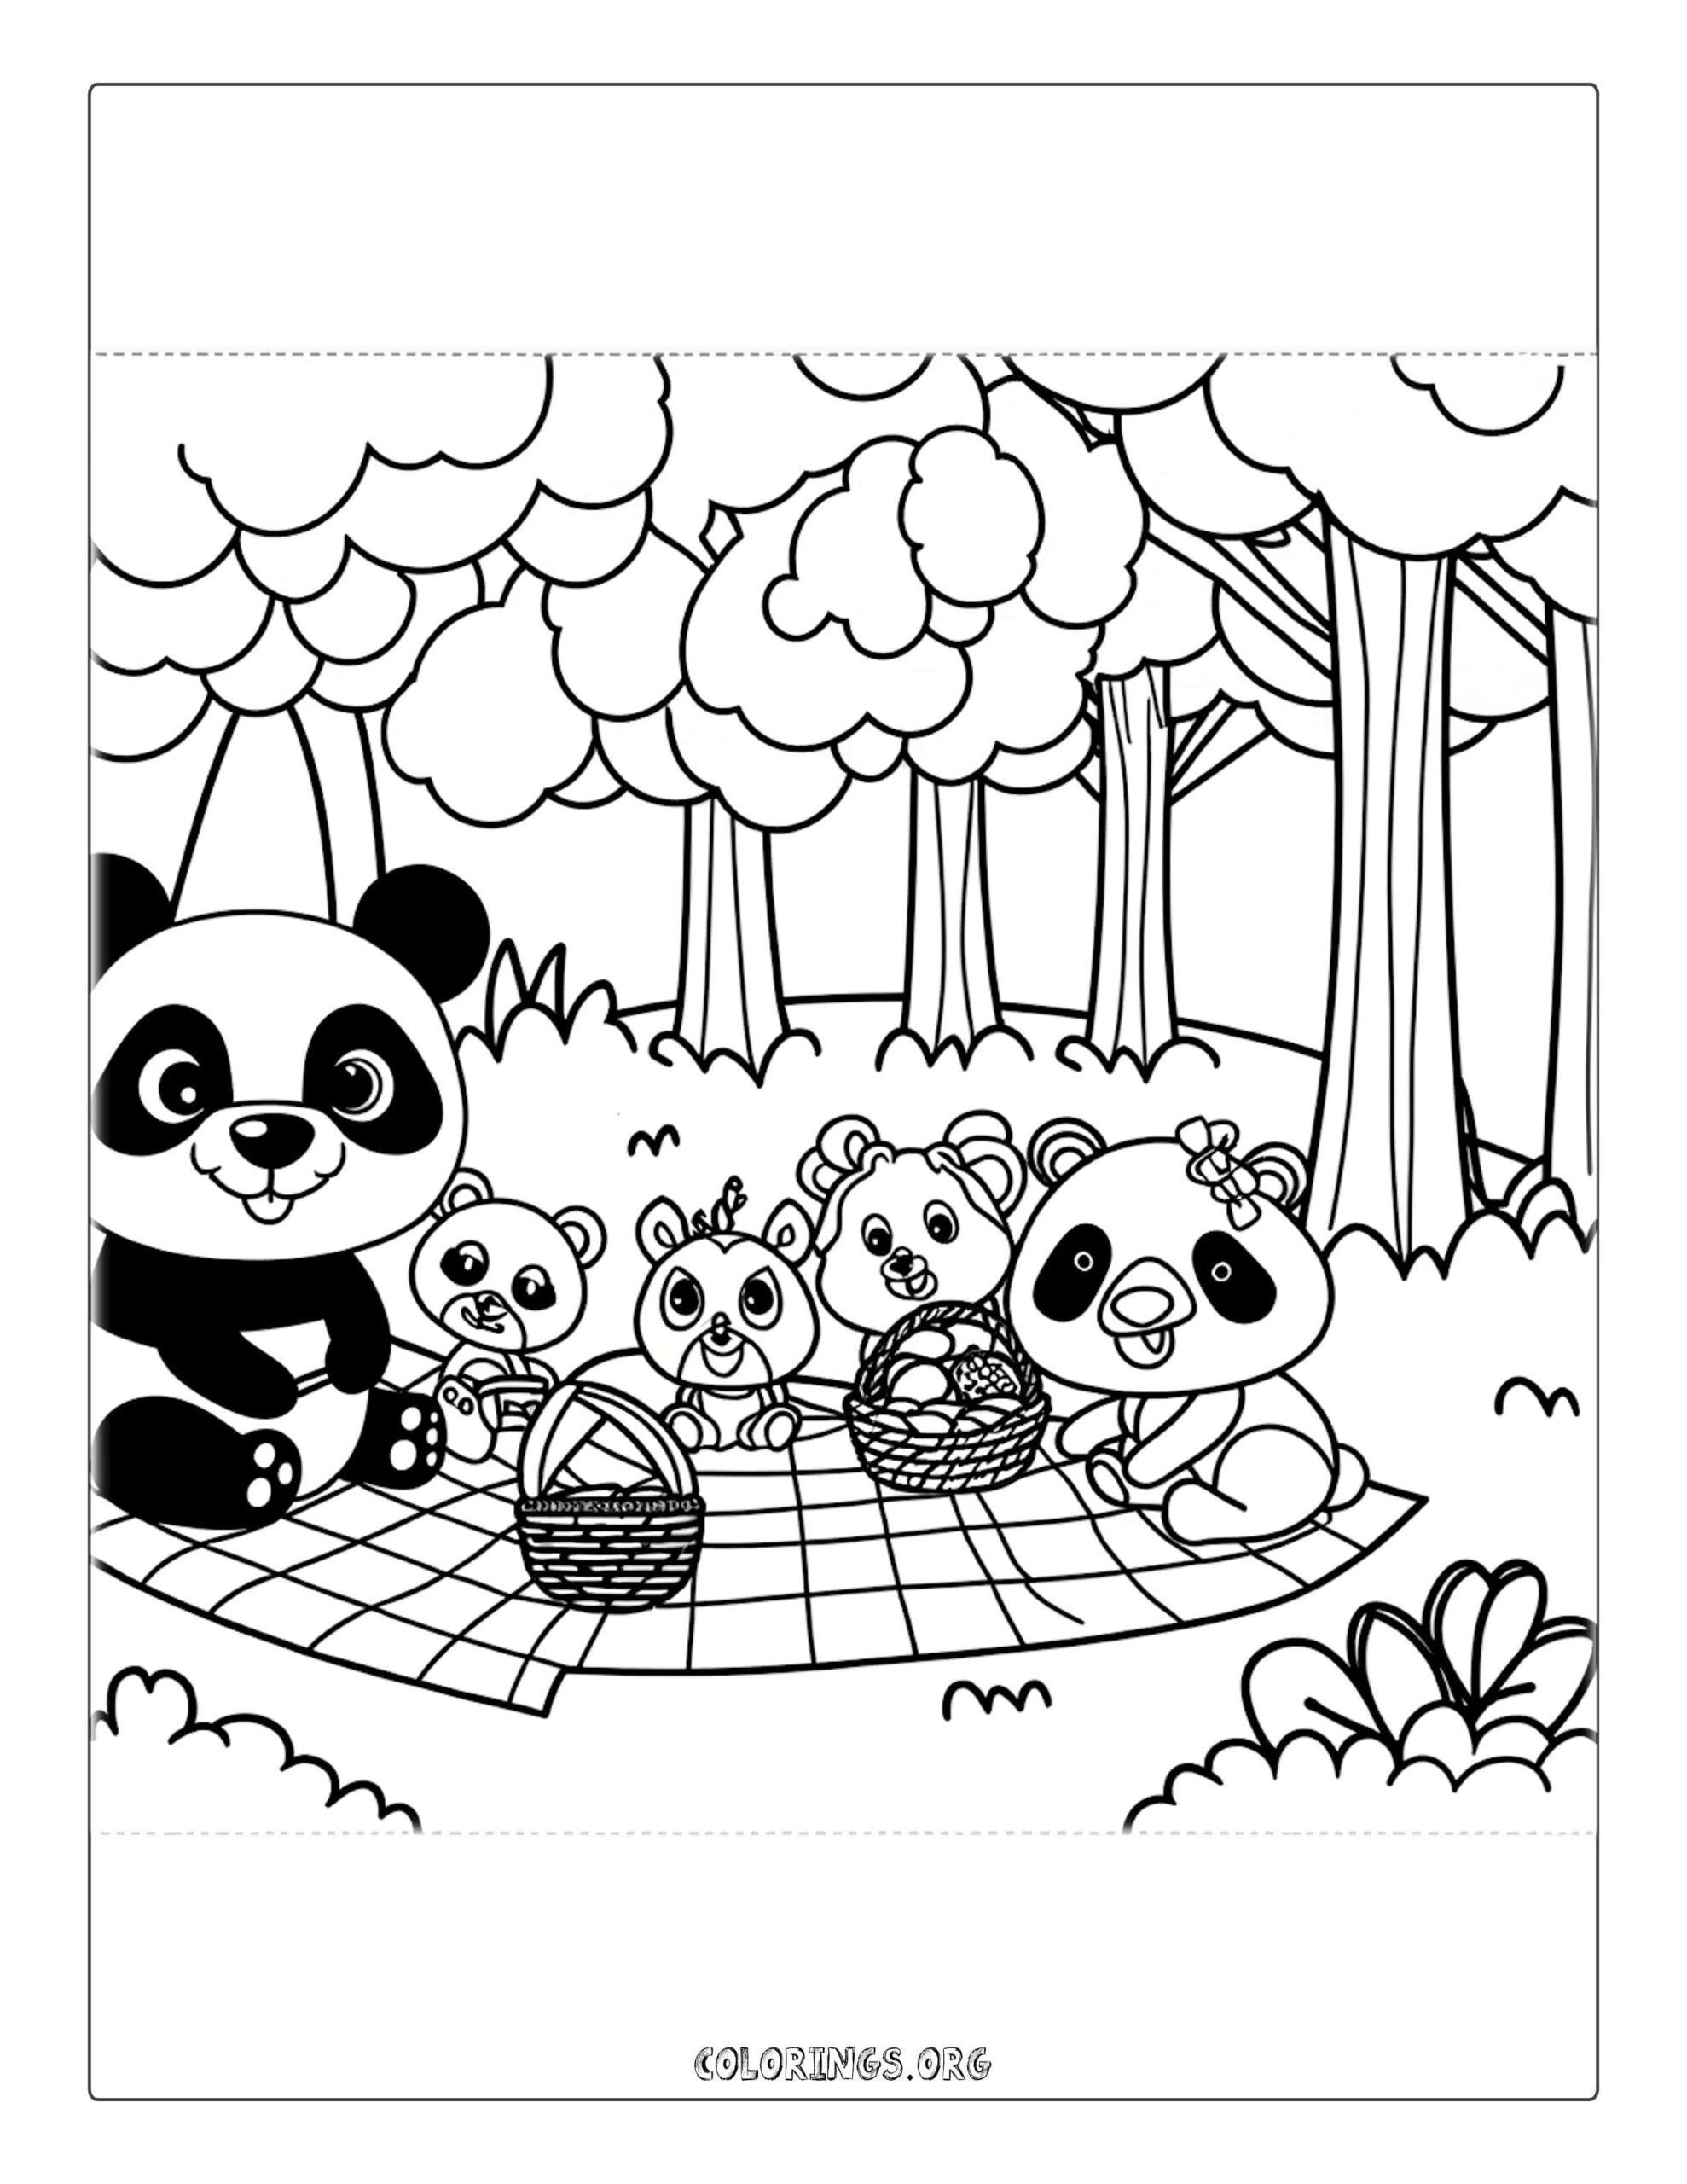 Panda Picnic with Forest Animals Coloring Page